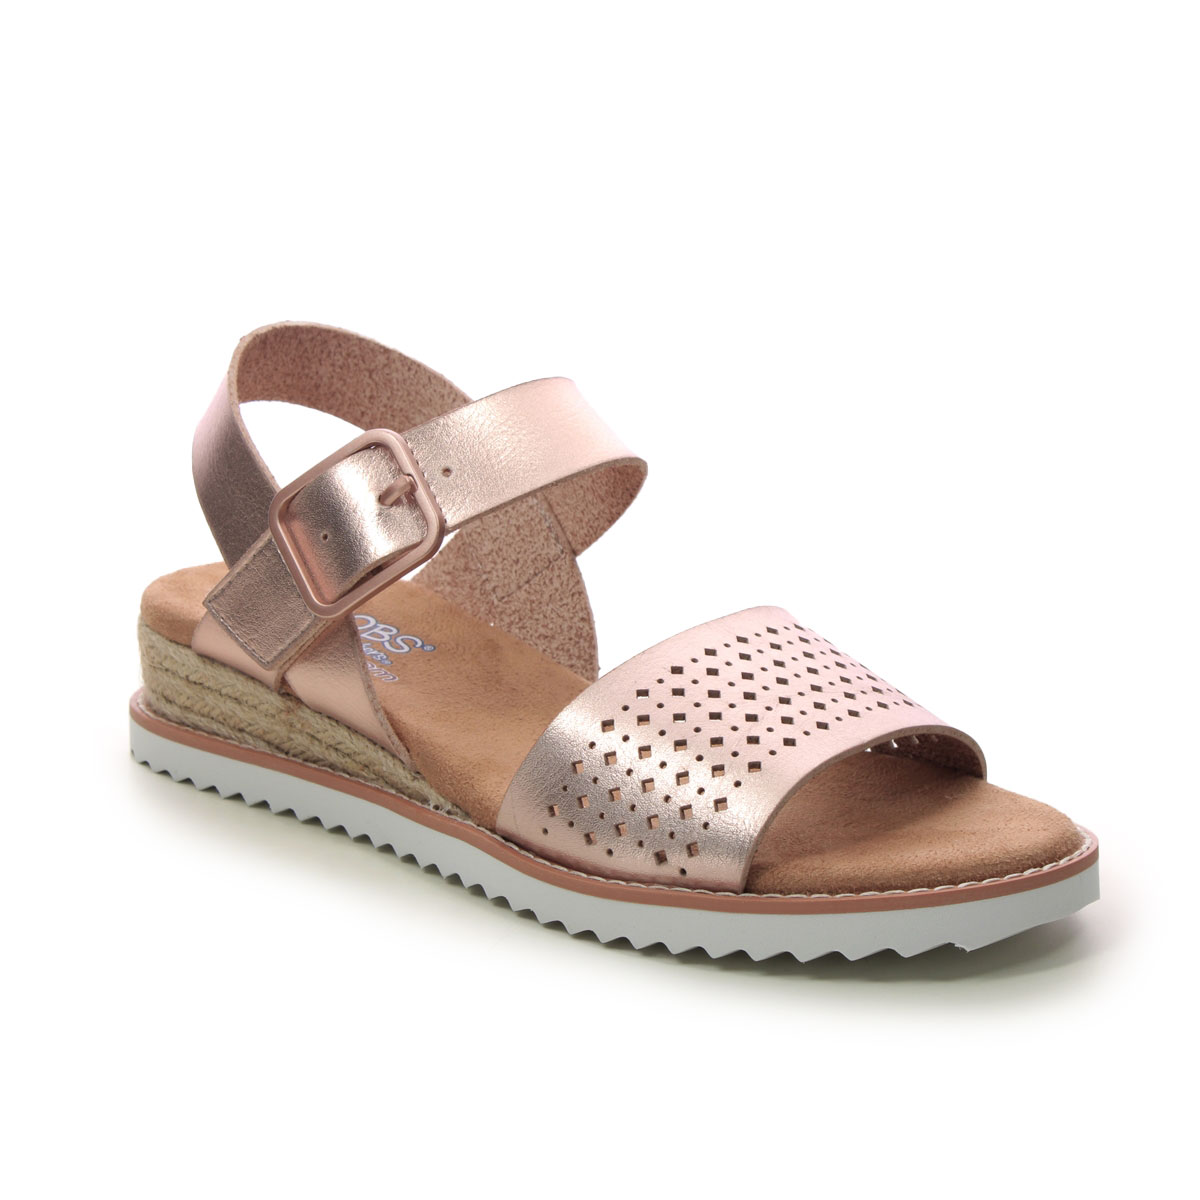 Skechers Bobs Desert RSGD Rose gold Womens Wedge Sandals 114144 in a Plain Man-made in Size 8